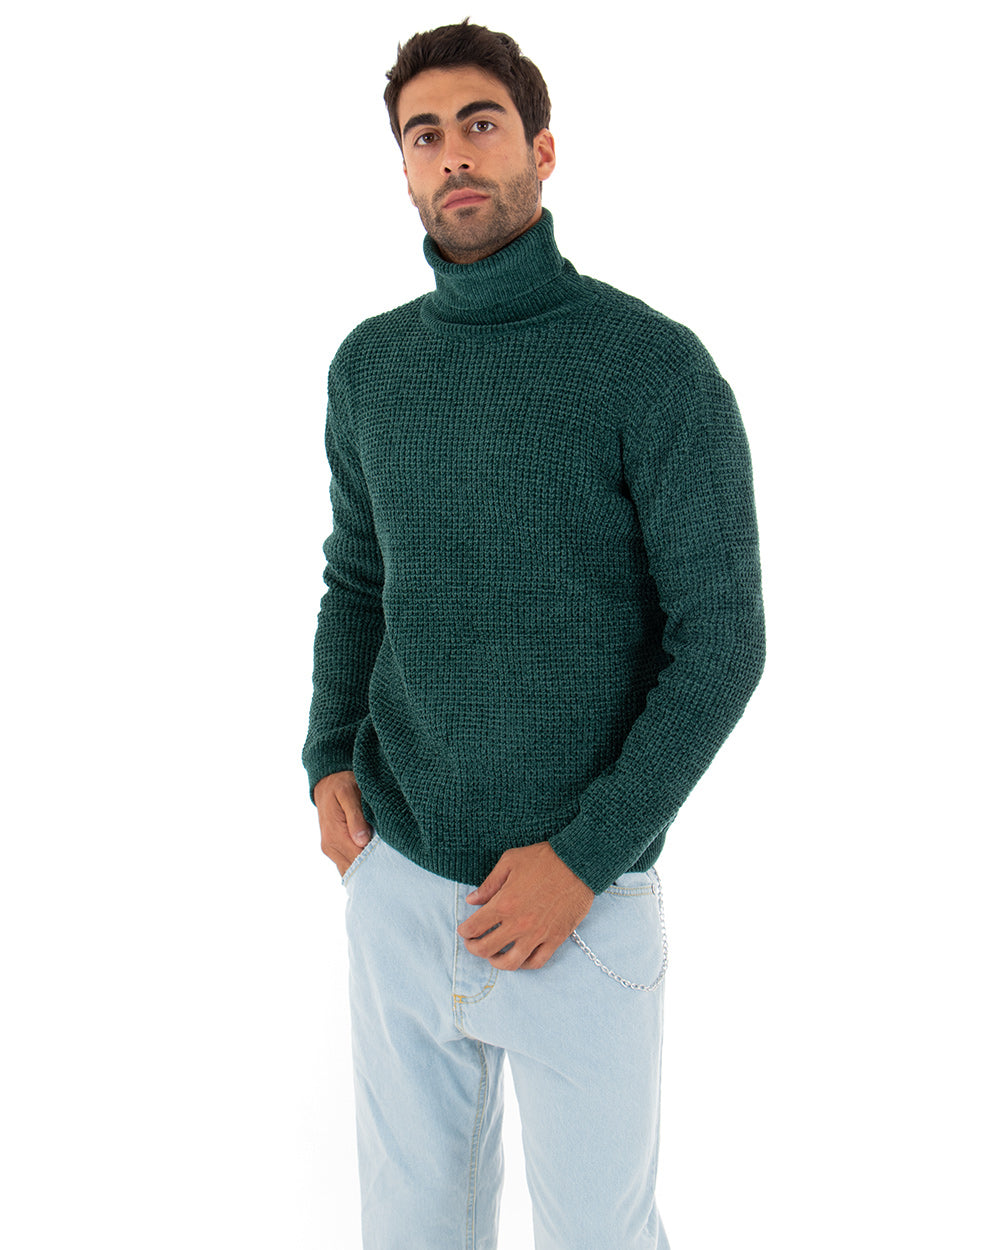 Men's Long Sleeved Chenille Sweater Solid Color Petrol High Neck GIOSAL